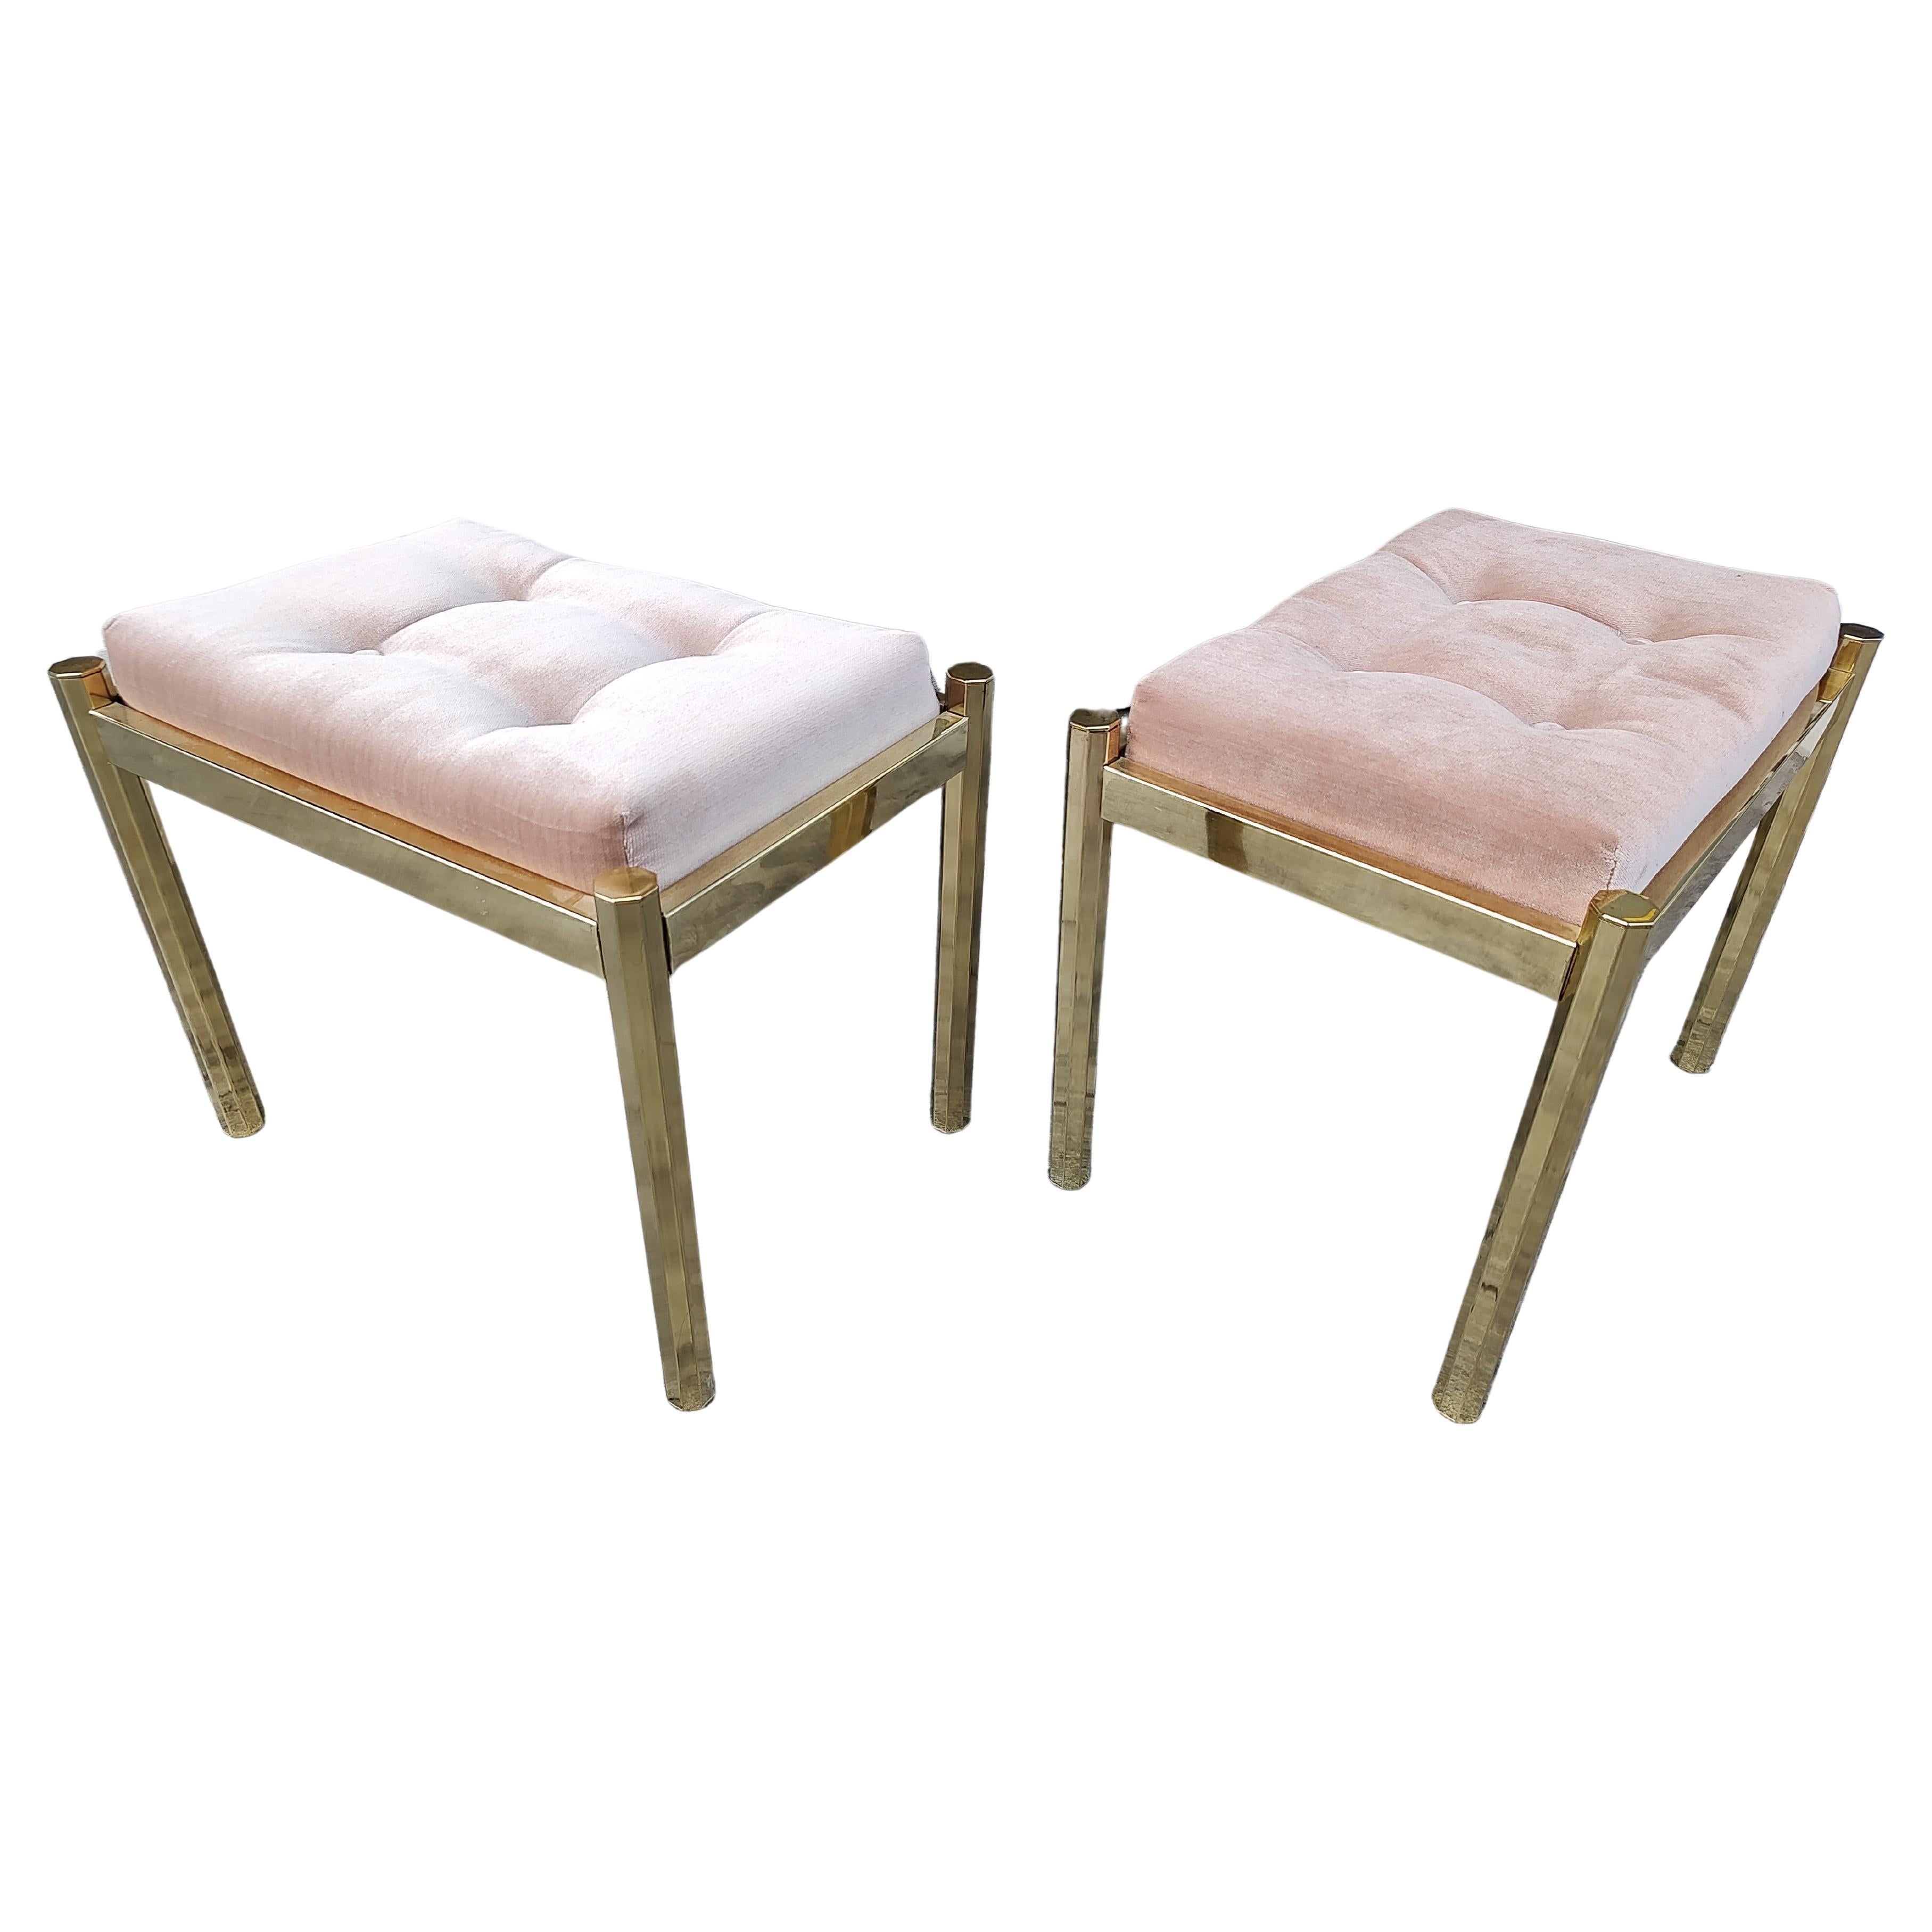 Polished Pair of Mid-Century Modern Hollywood Regency Brass with Tufted Cushions Benches